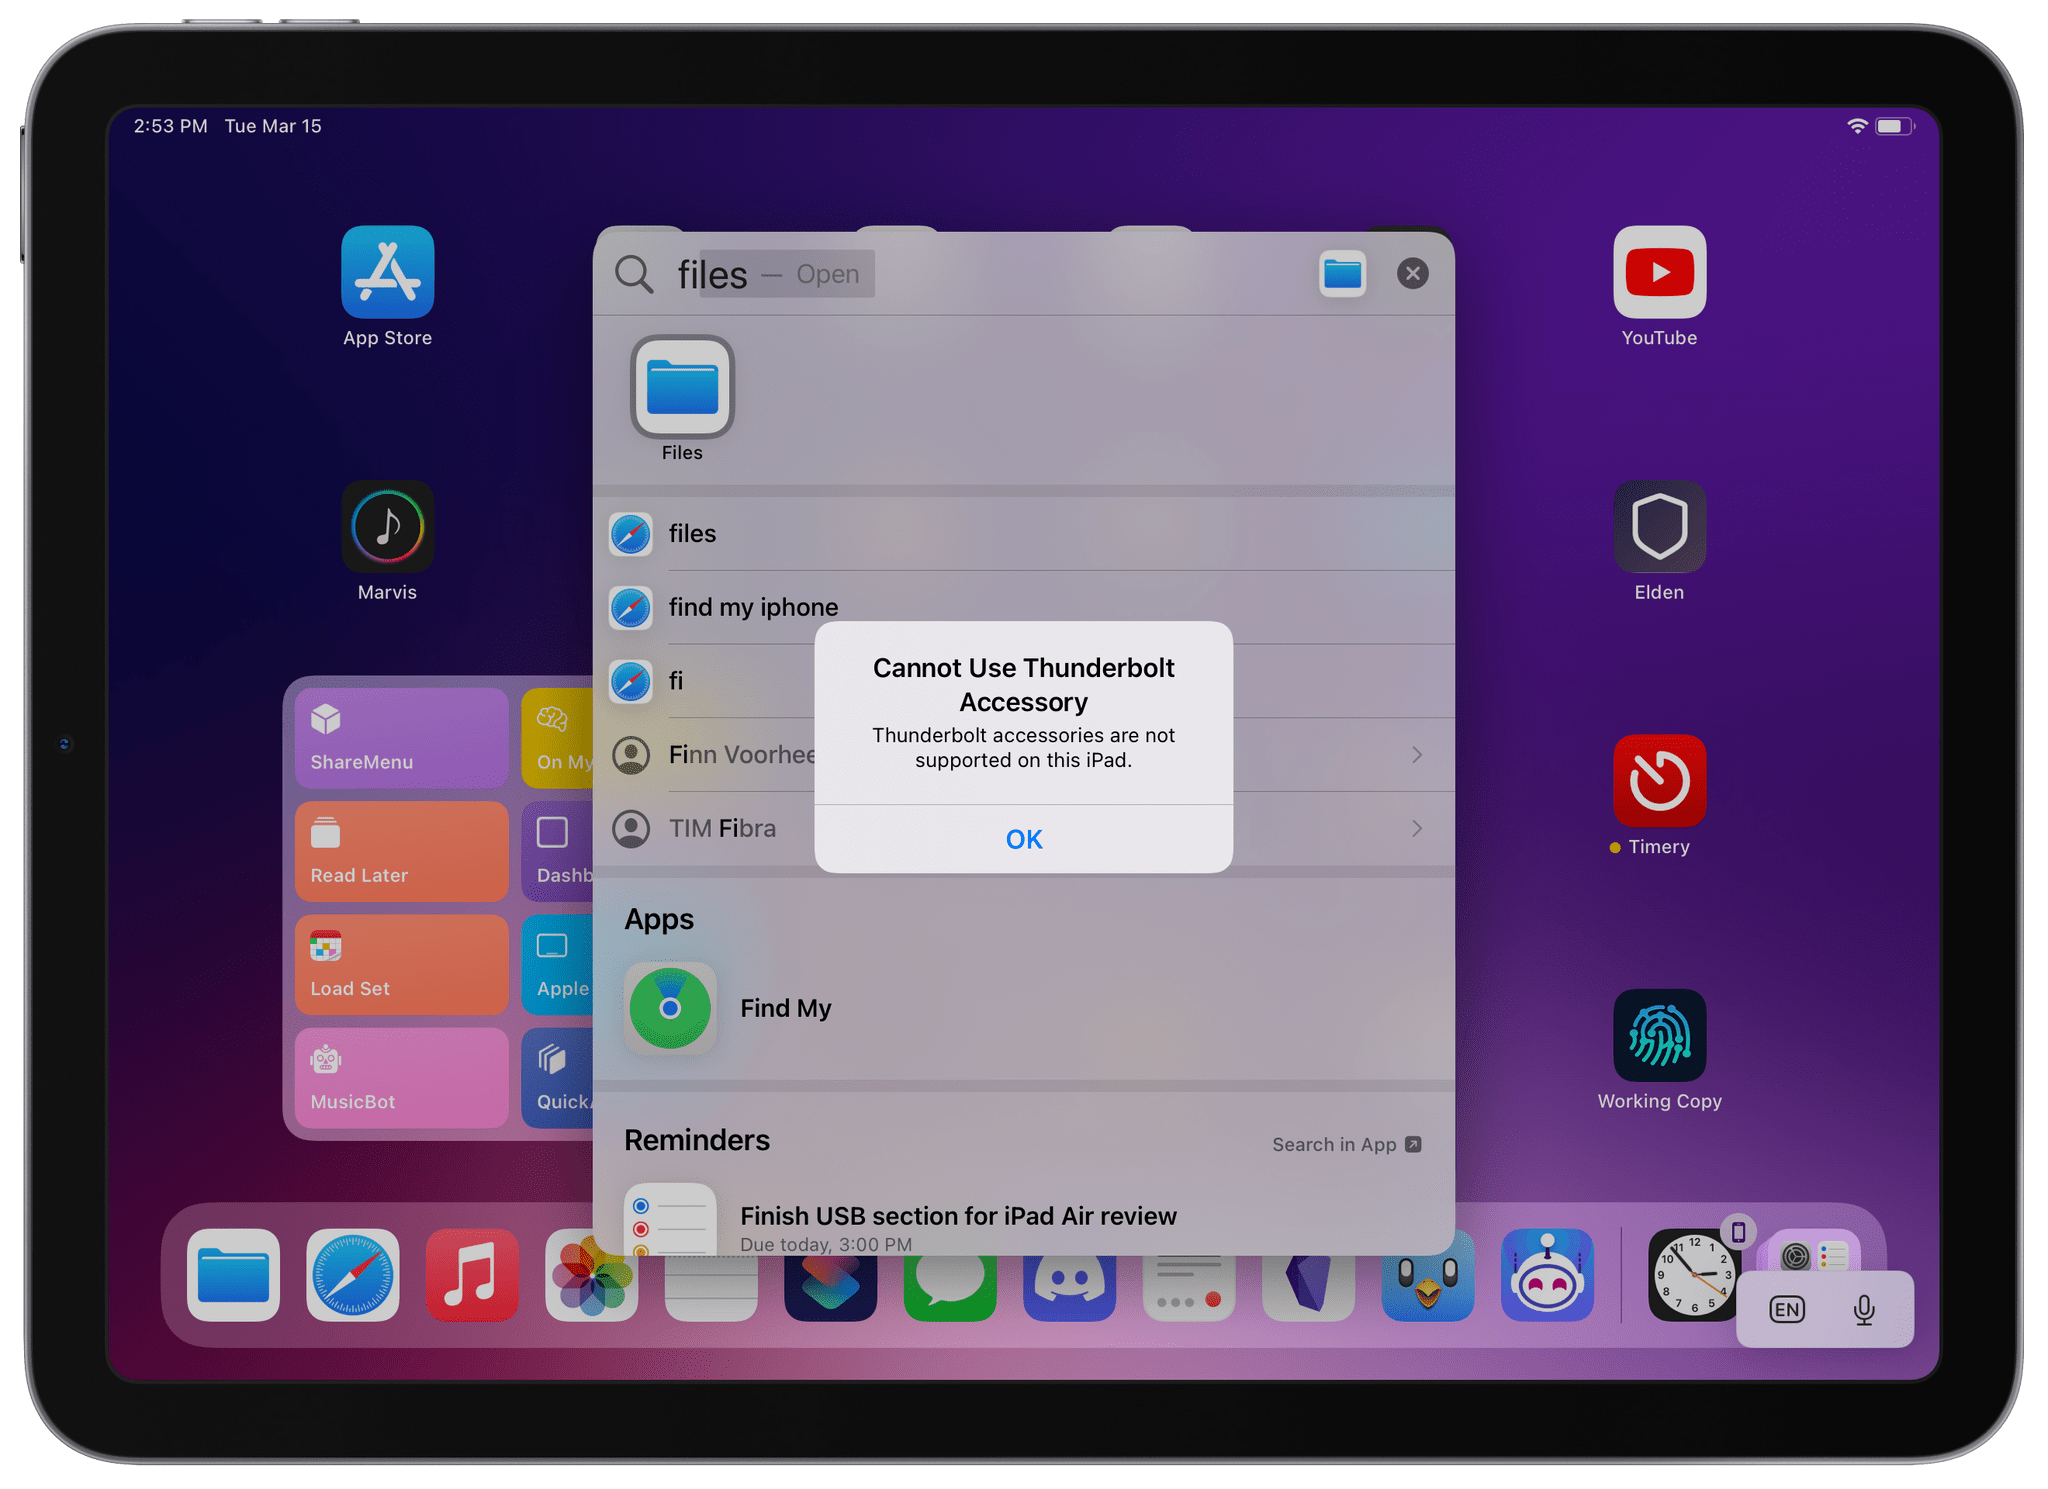 Thunderbolt accessories are not supported on the iPad Air.